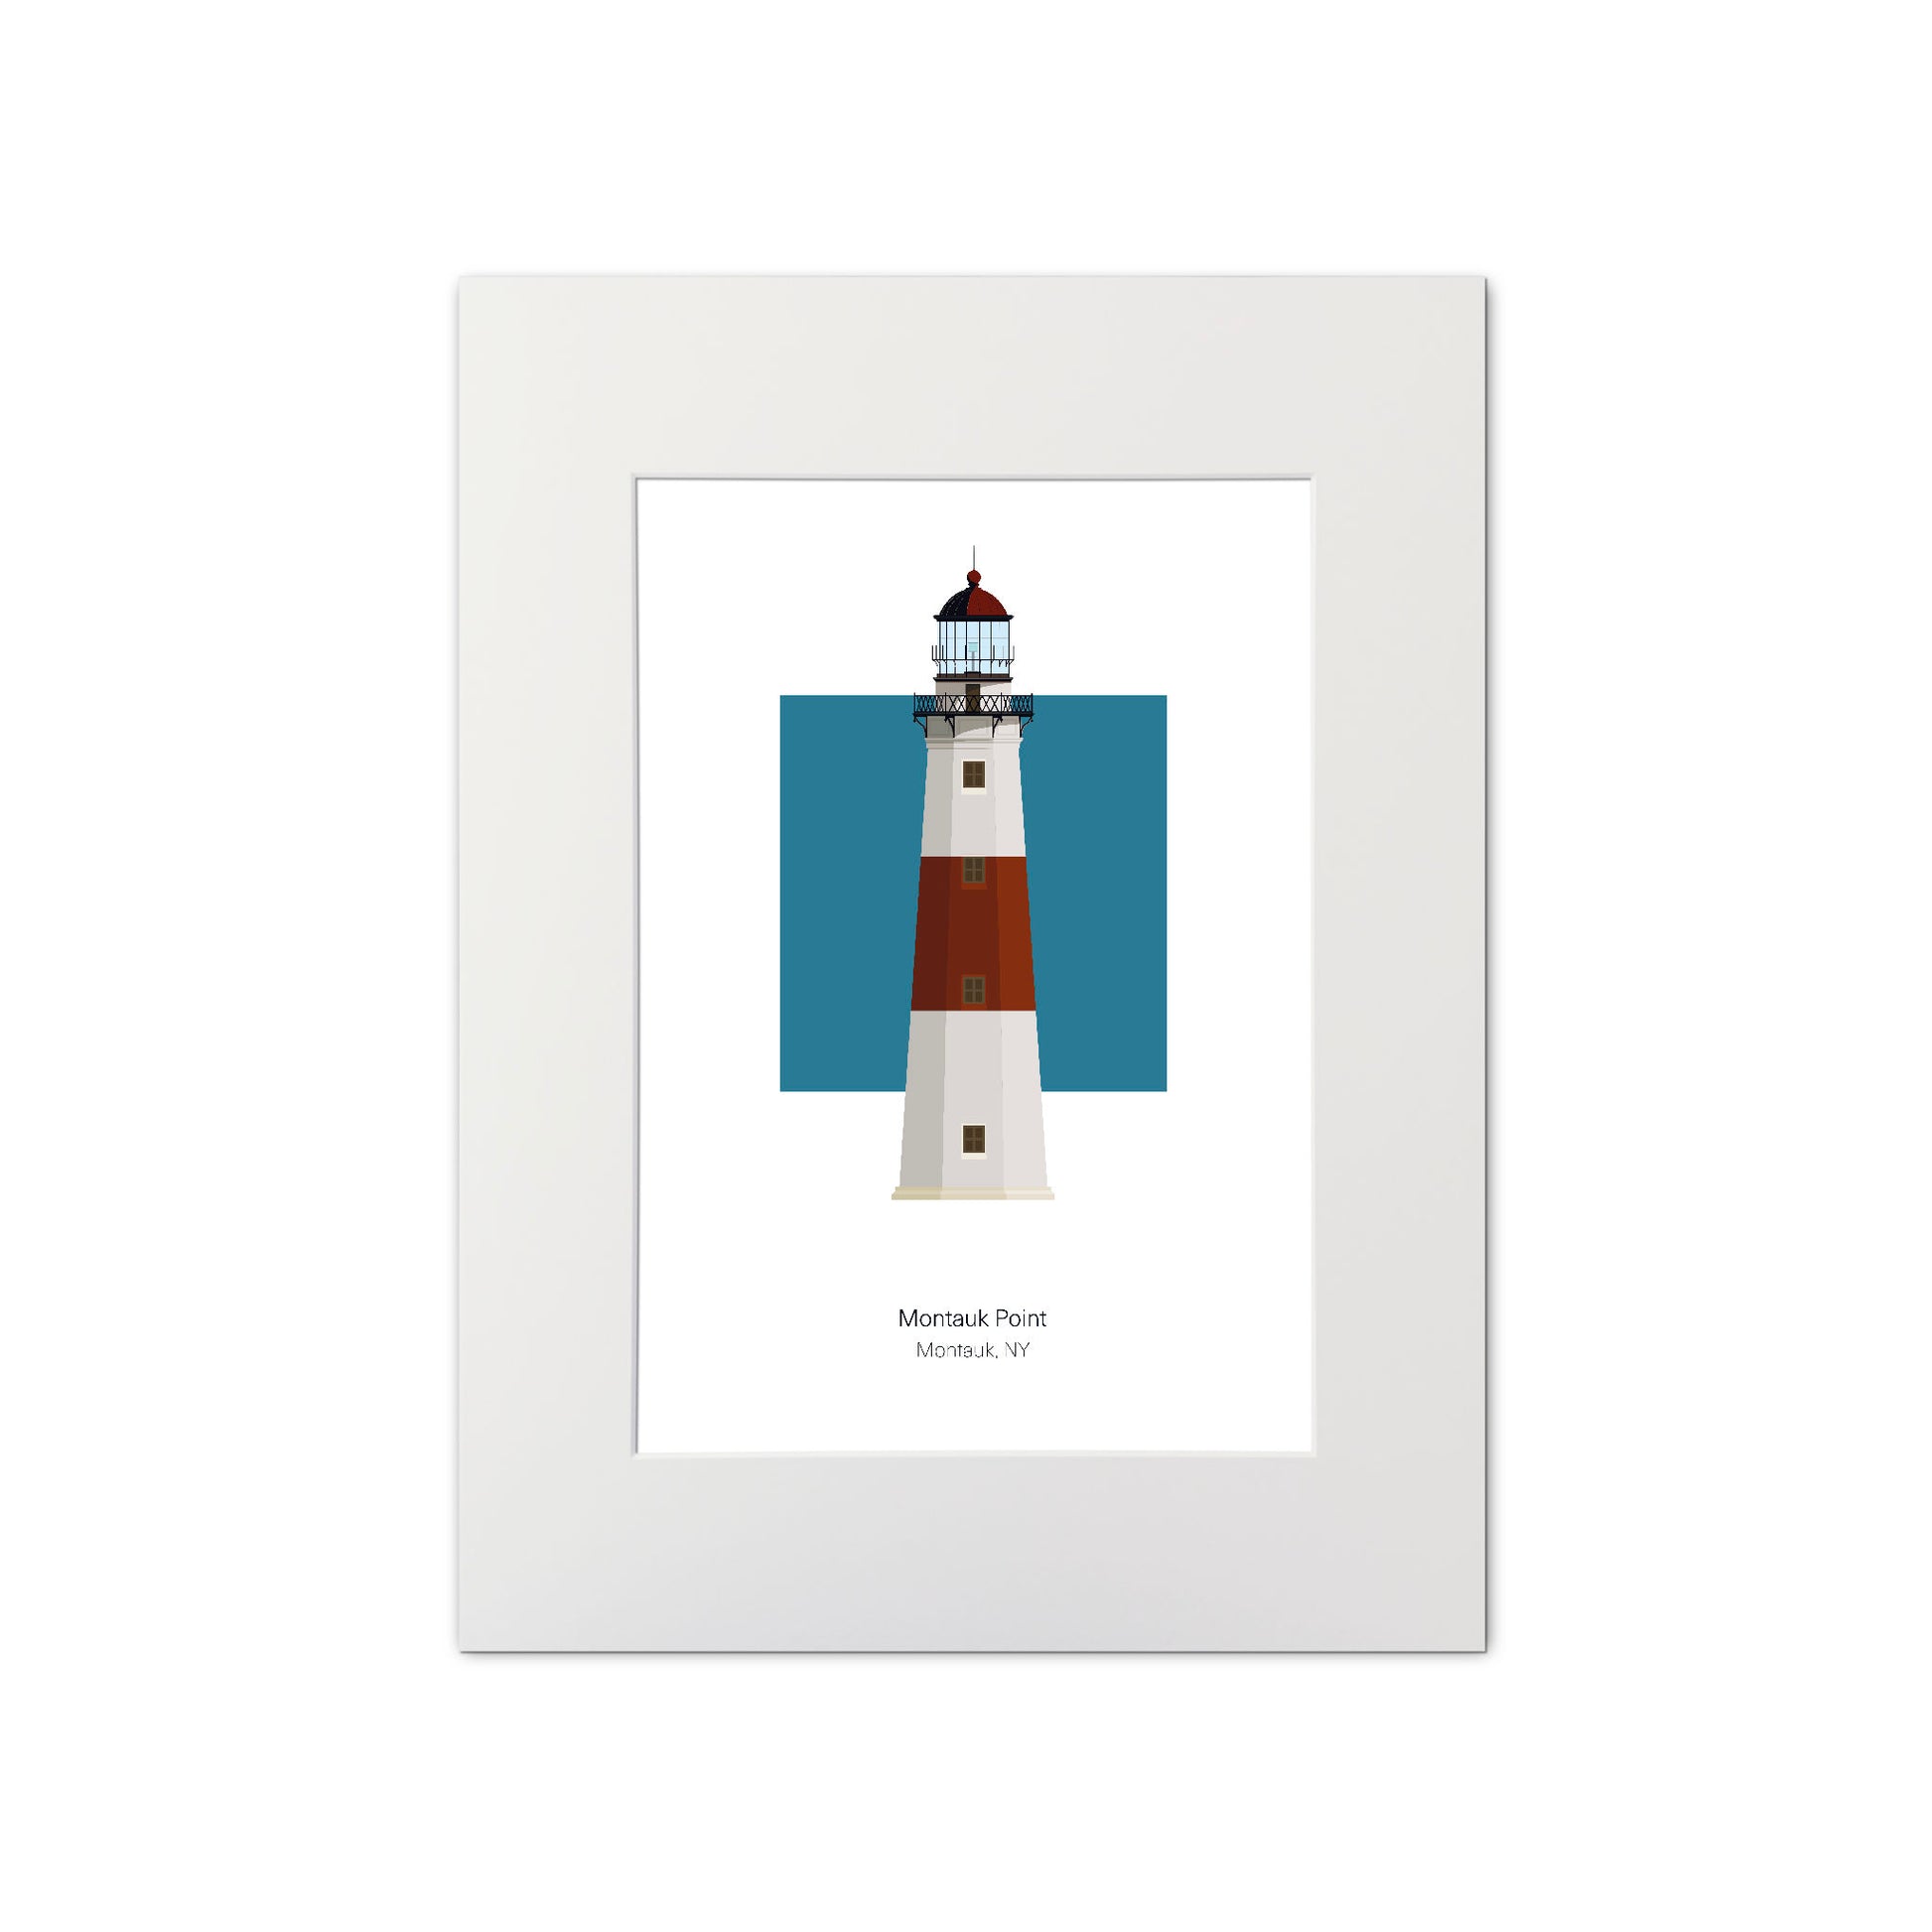 Illustration of the Montauk Point lighthouse, New York, USA. On a white background with aqua blue square as a backdrop., mounted and measuring 11"x14" (30x40cm).